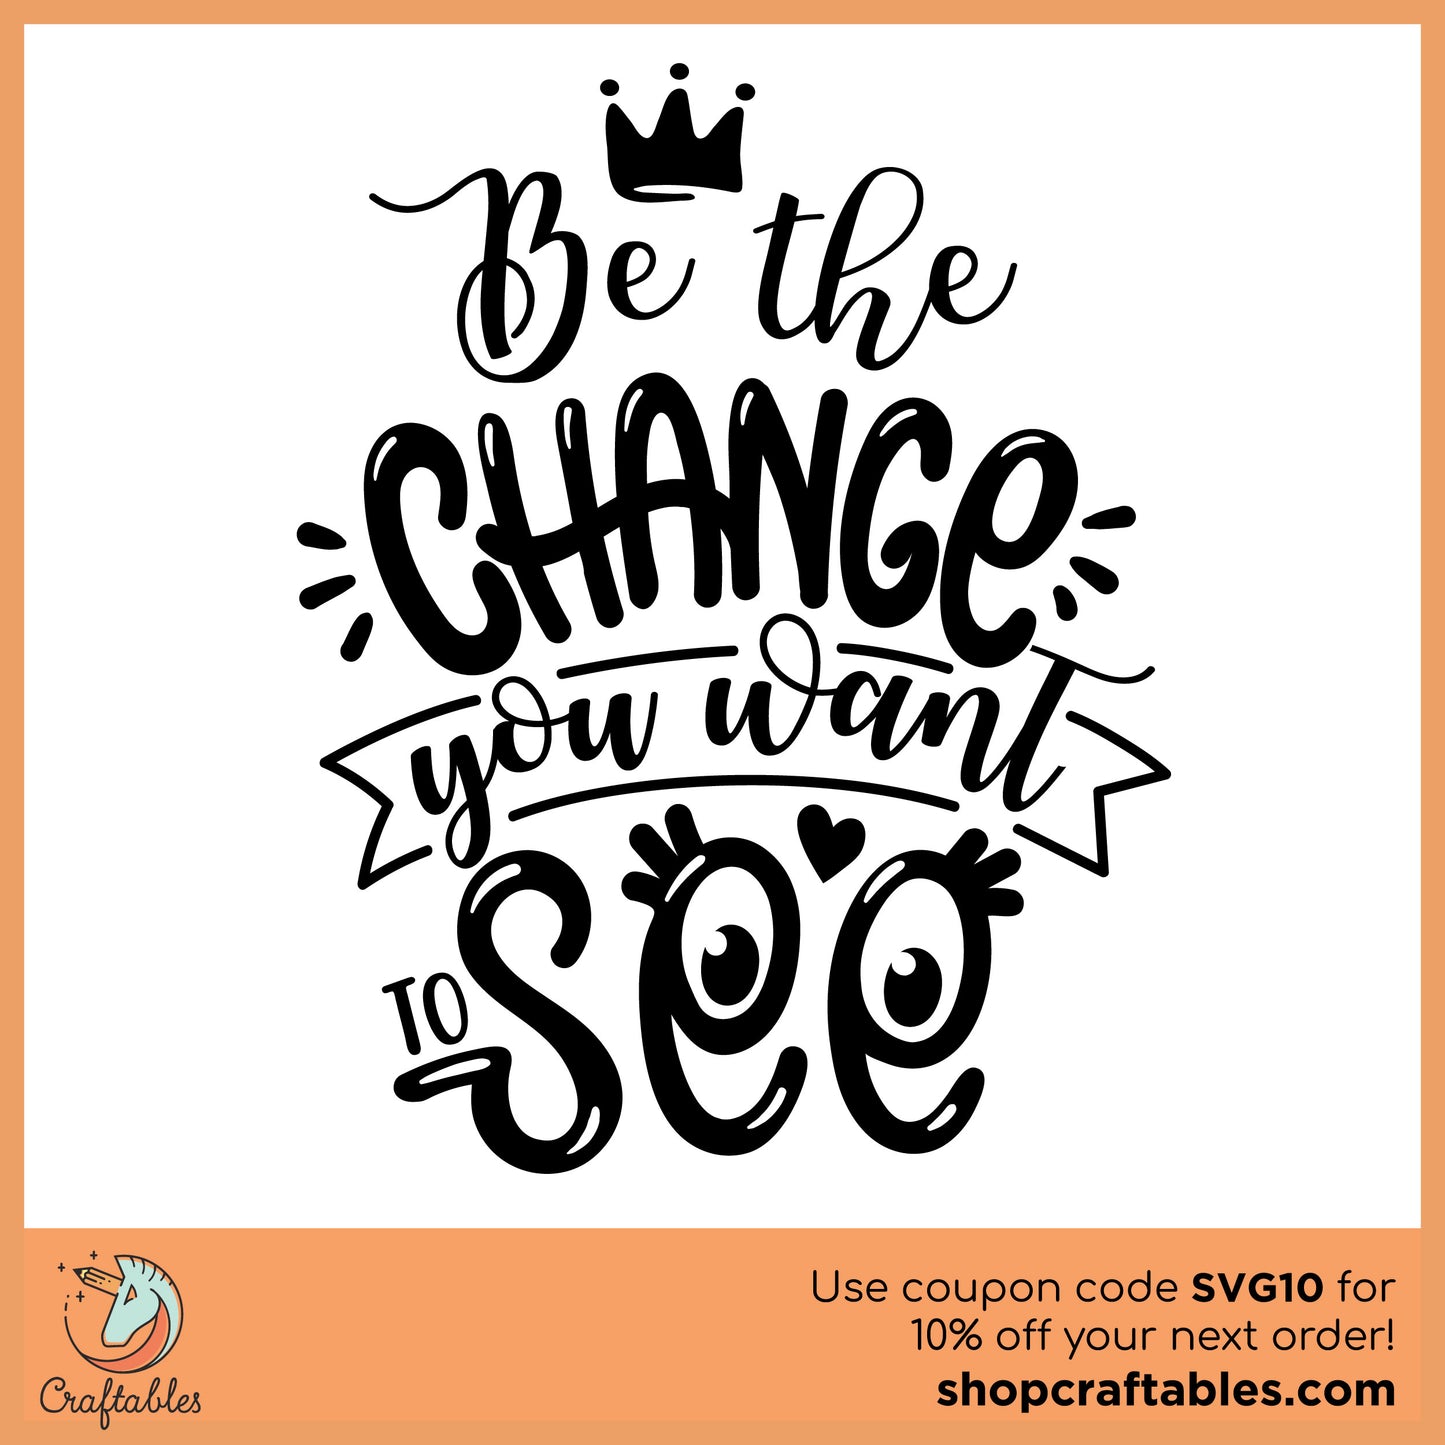 Free Be the Change You Want to See SVG Cut File